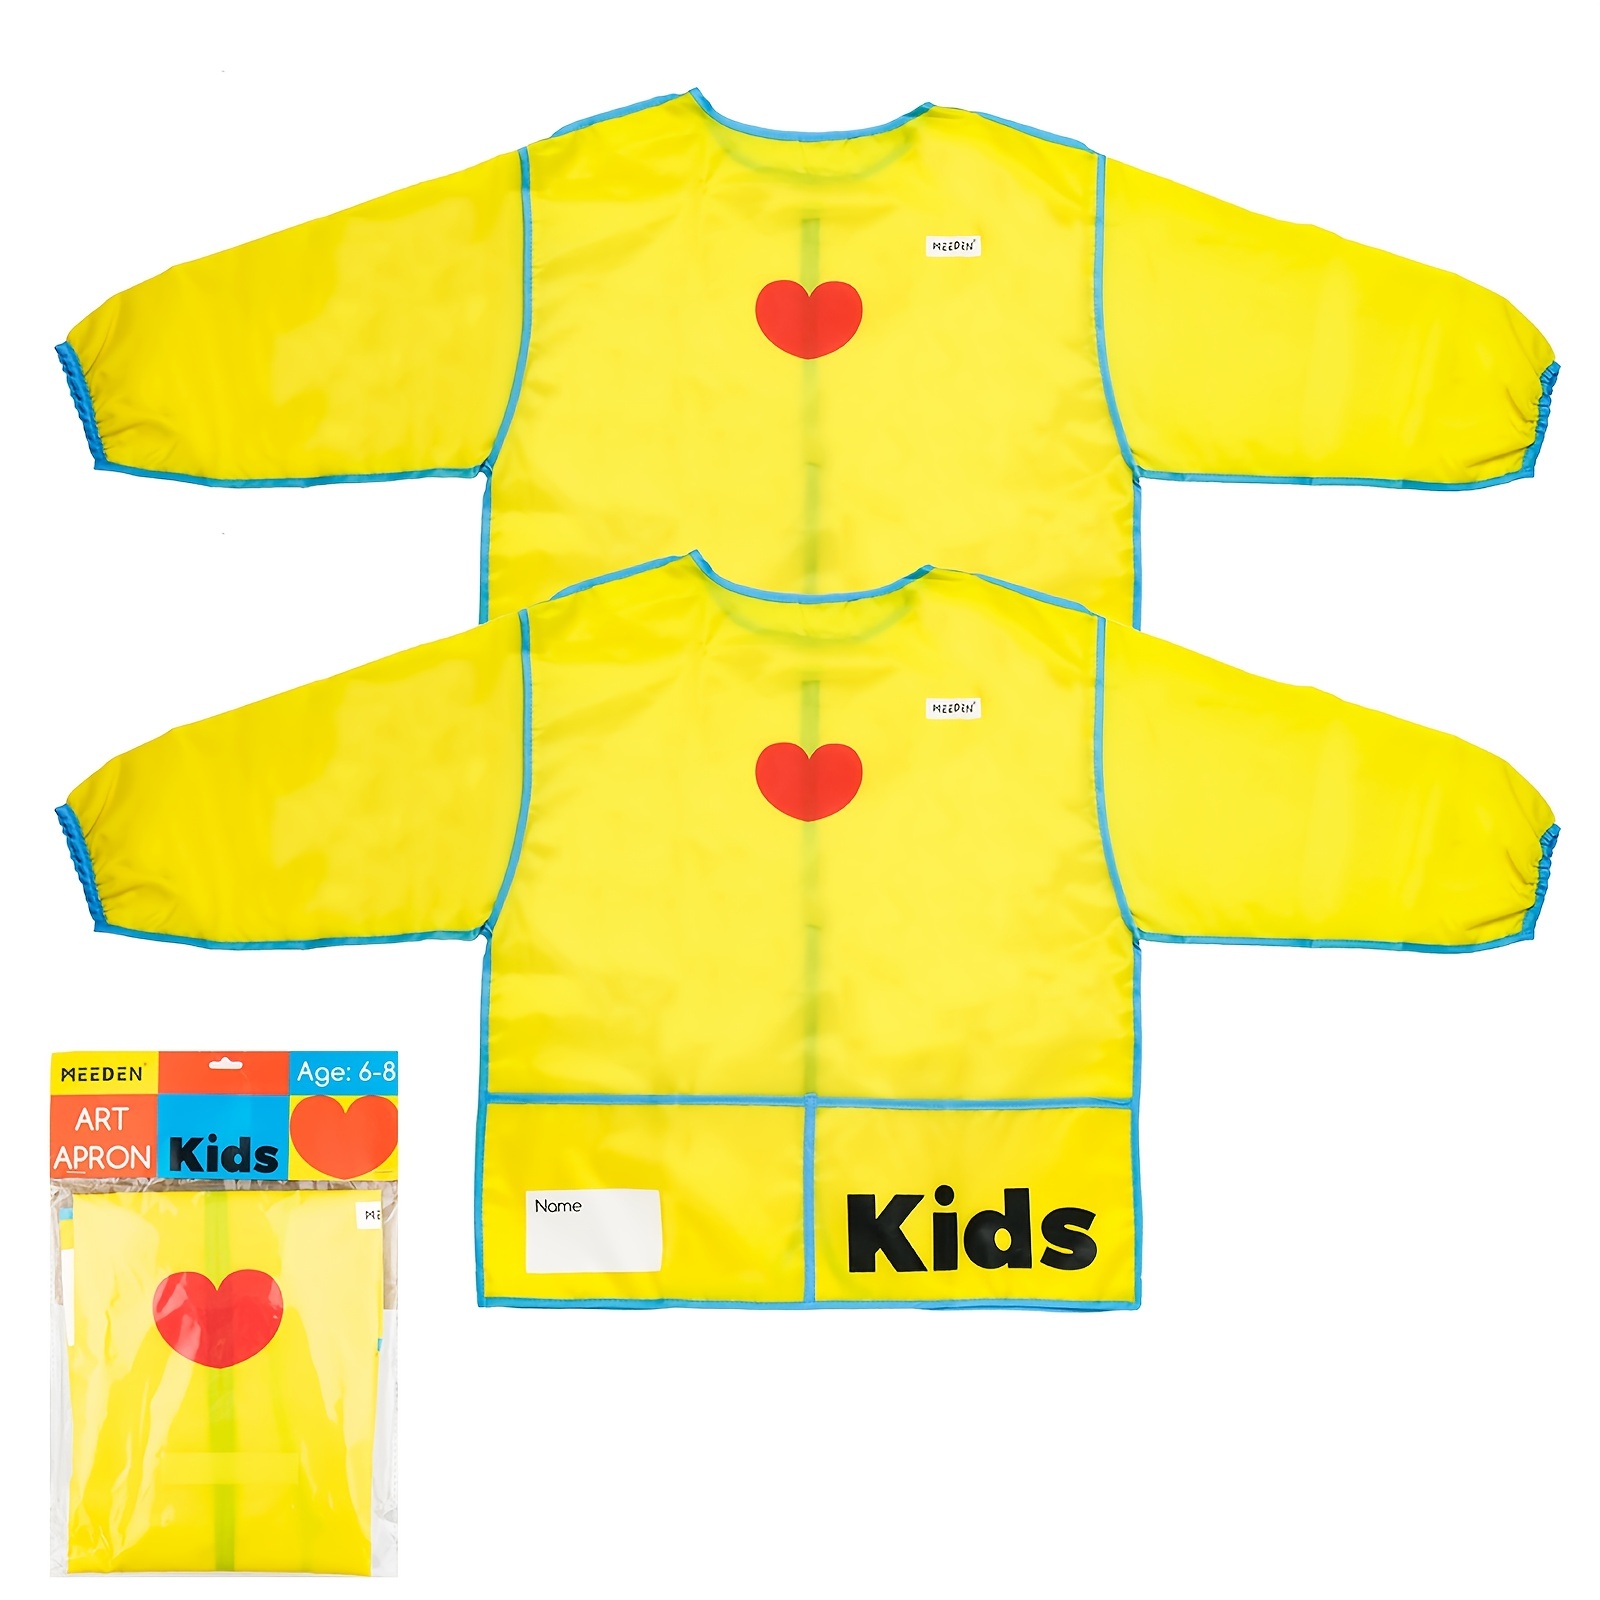 Children's Aprons Children's Painting, Apron Kids Painting Sleeve